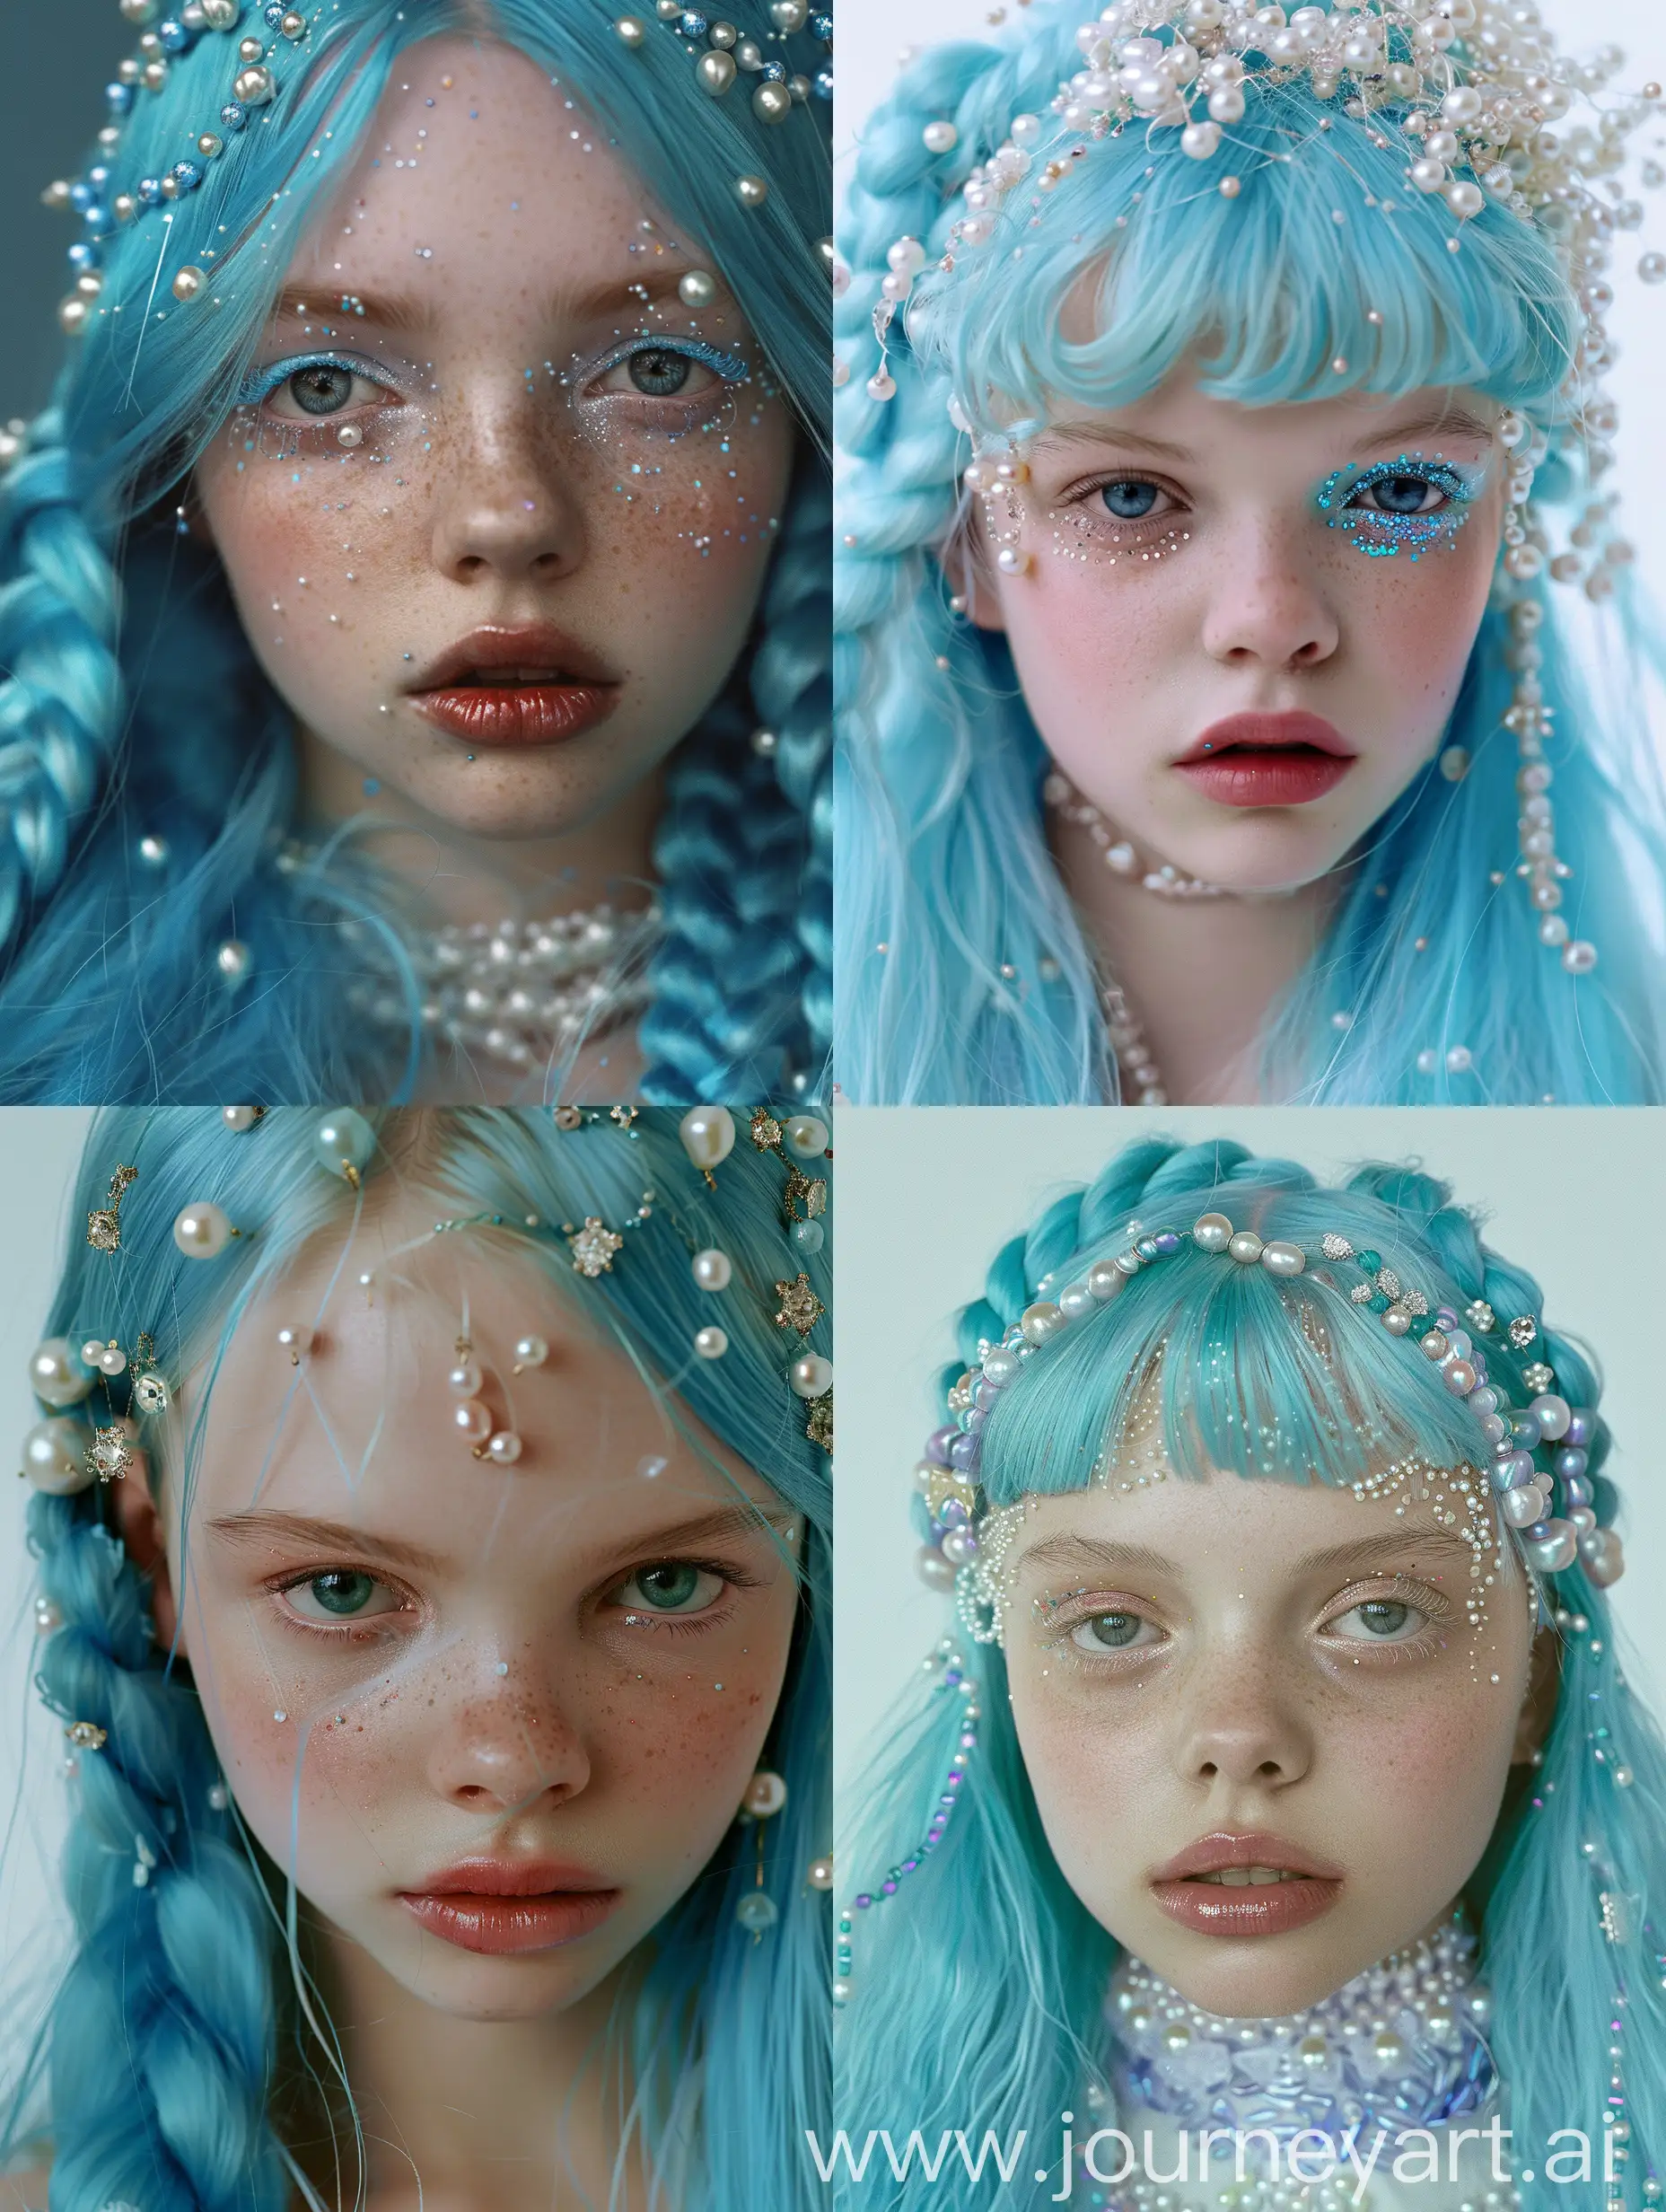 Elle-Fanning-as-Lily-Rose-Depp-Mermaidinspired-Glamour-with-Bright-Blue-Voluminous-Hair-and-Pearl-Adornments